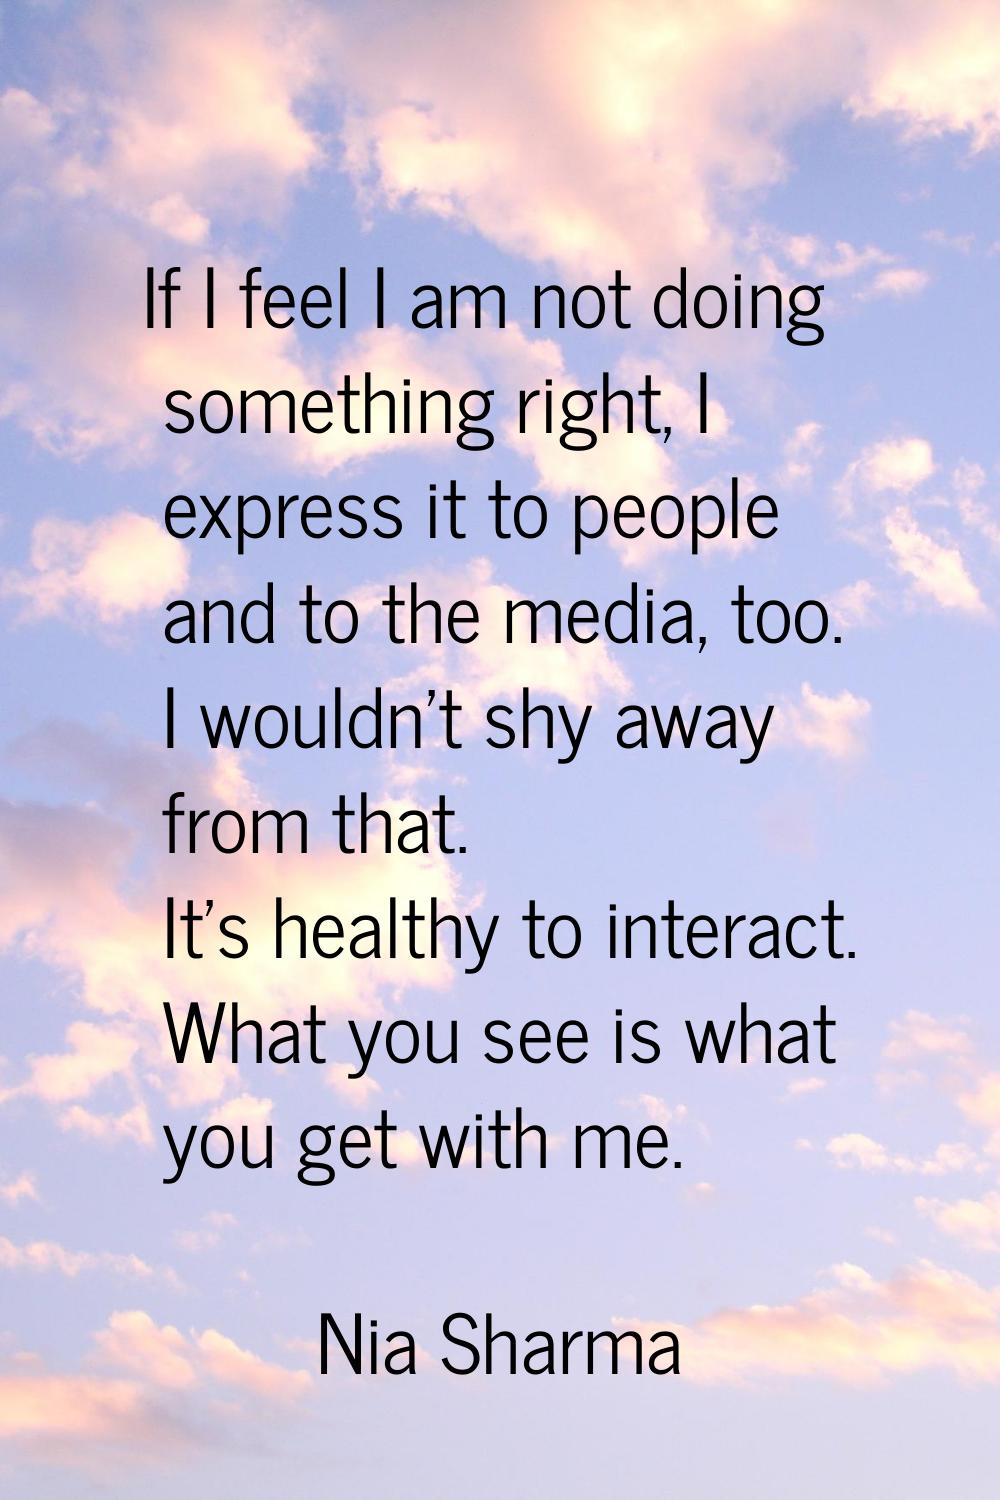 If I feel I am not doing something right, I express it to people and to the media, too. I wouldn't 